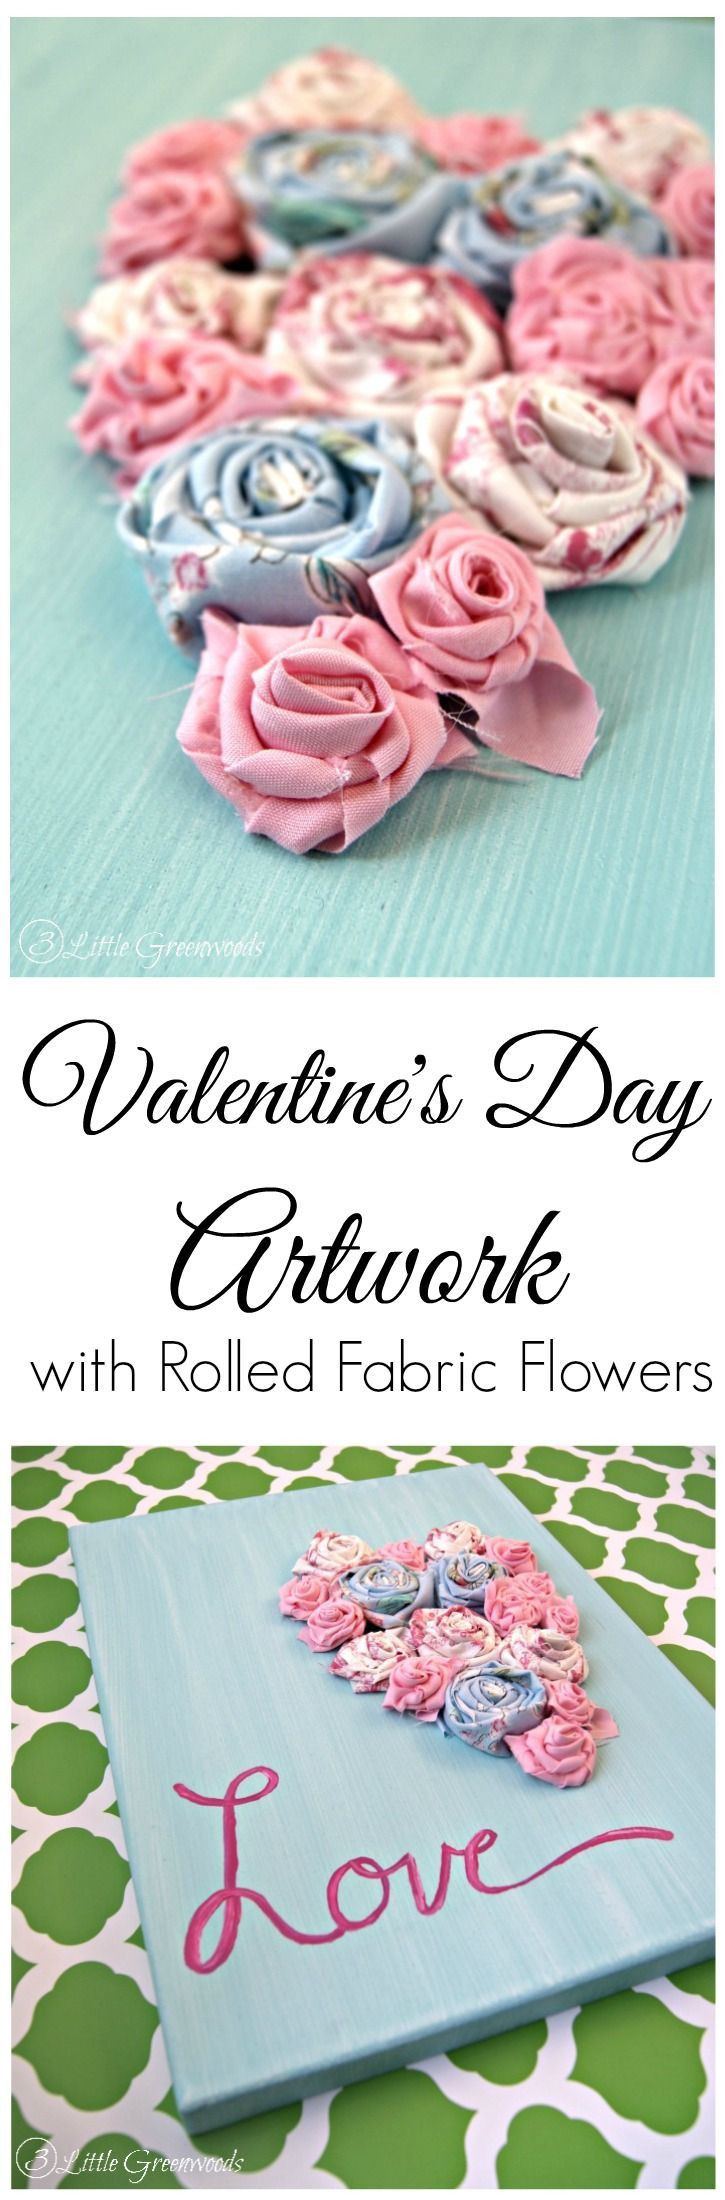 13 Cute Valentine Vase Fillers 2024 free download valentine vase fillers of 39 best valentines decor images on pinterest valentines day for bust your scrap fabric stash with this adorable rolled fabric flowers artwork for valentines day